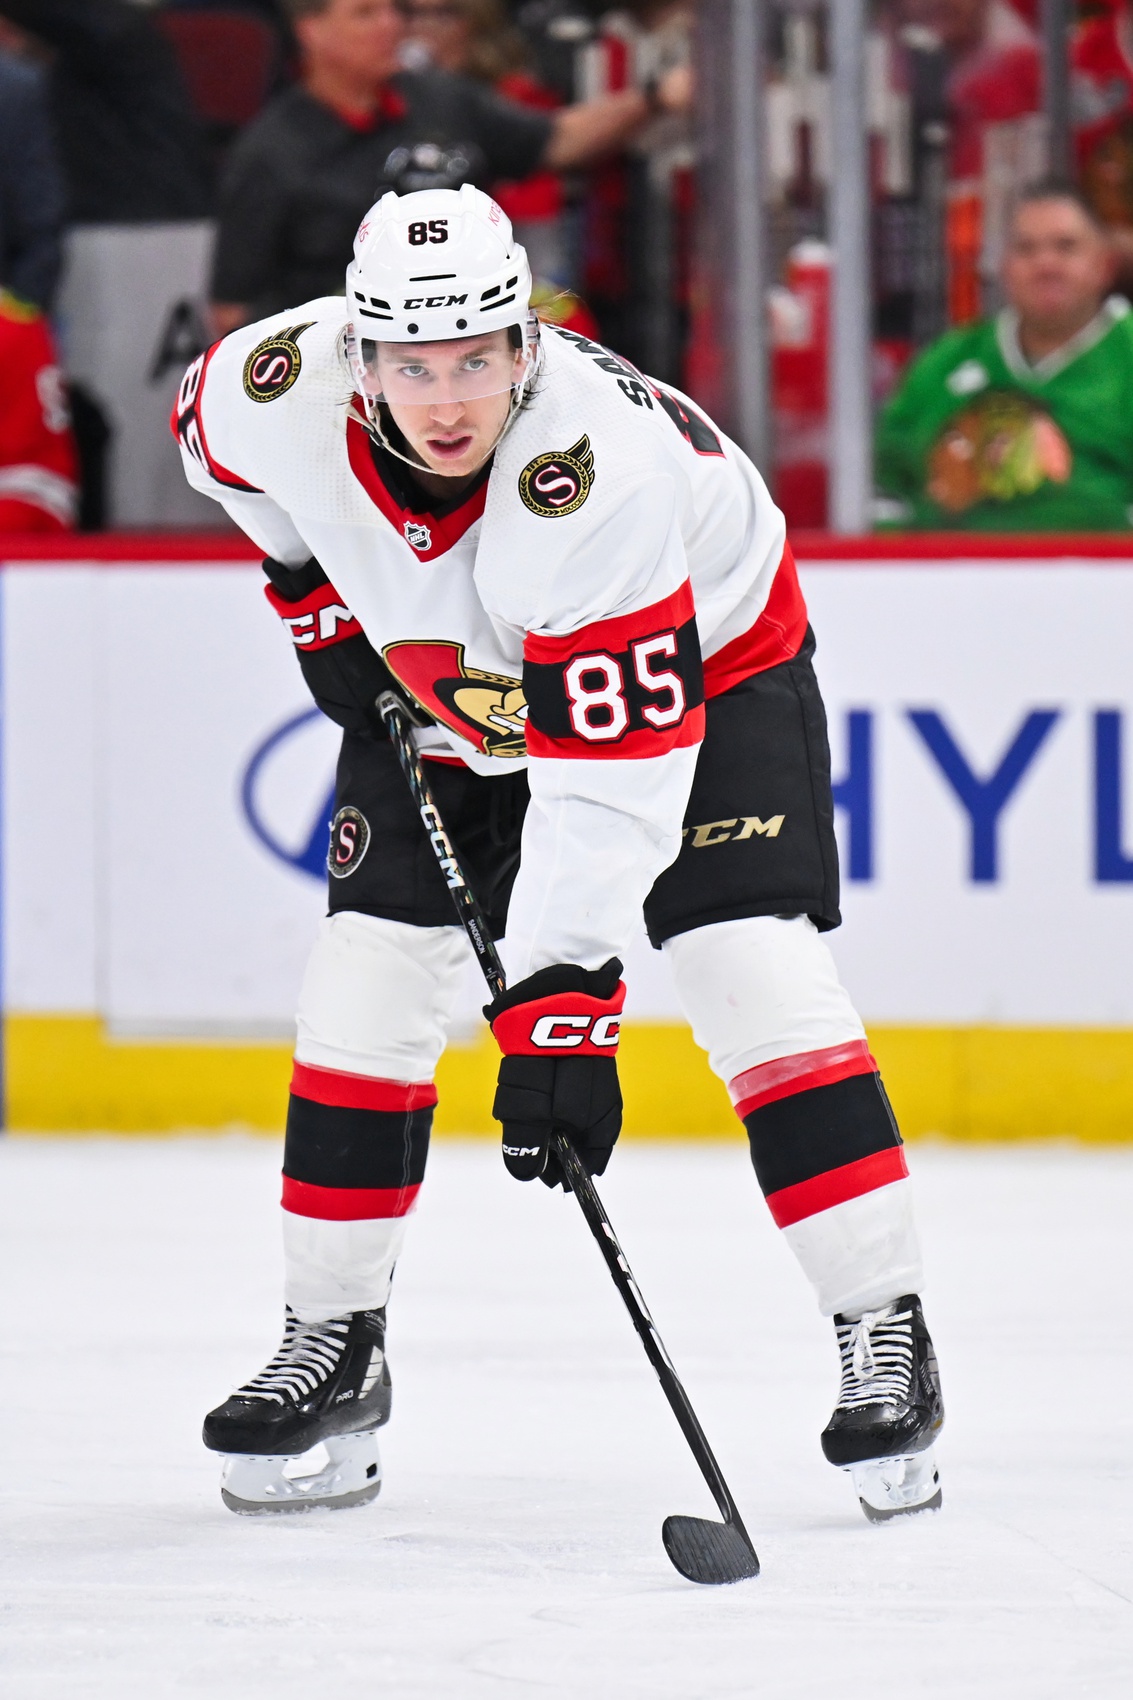 What do you think of the Senators deal for Jake Sanderson